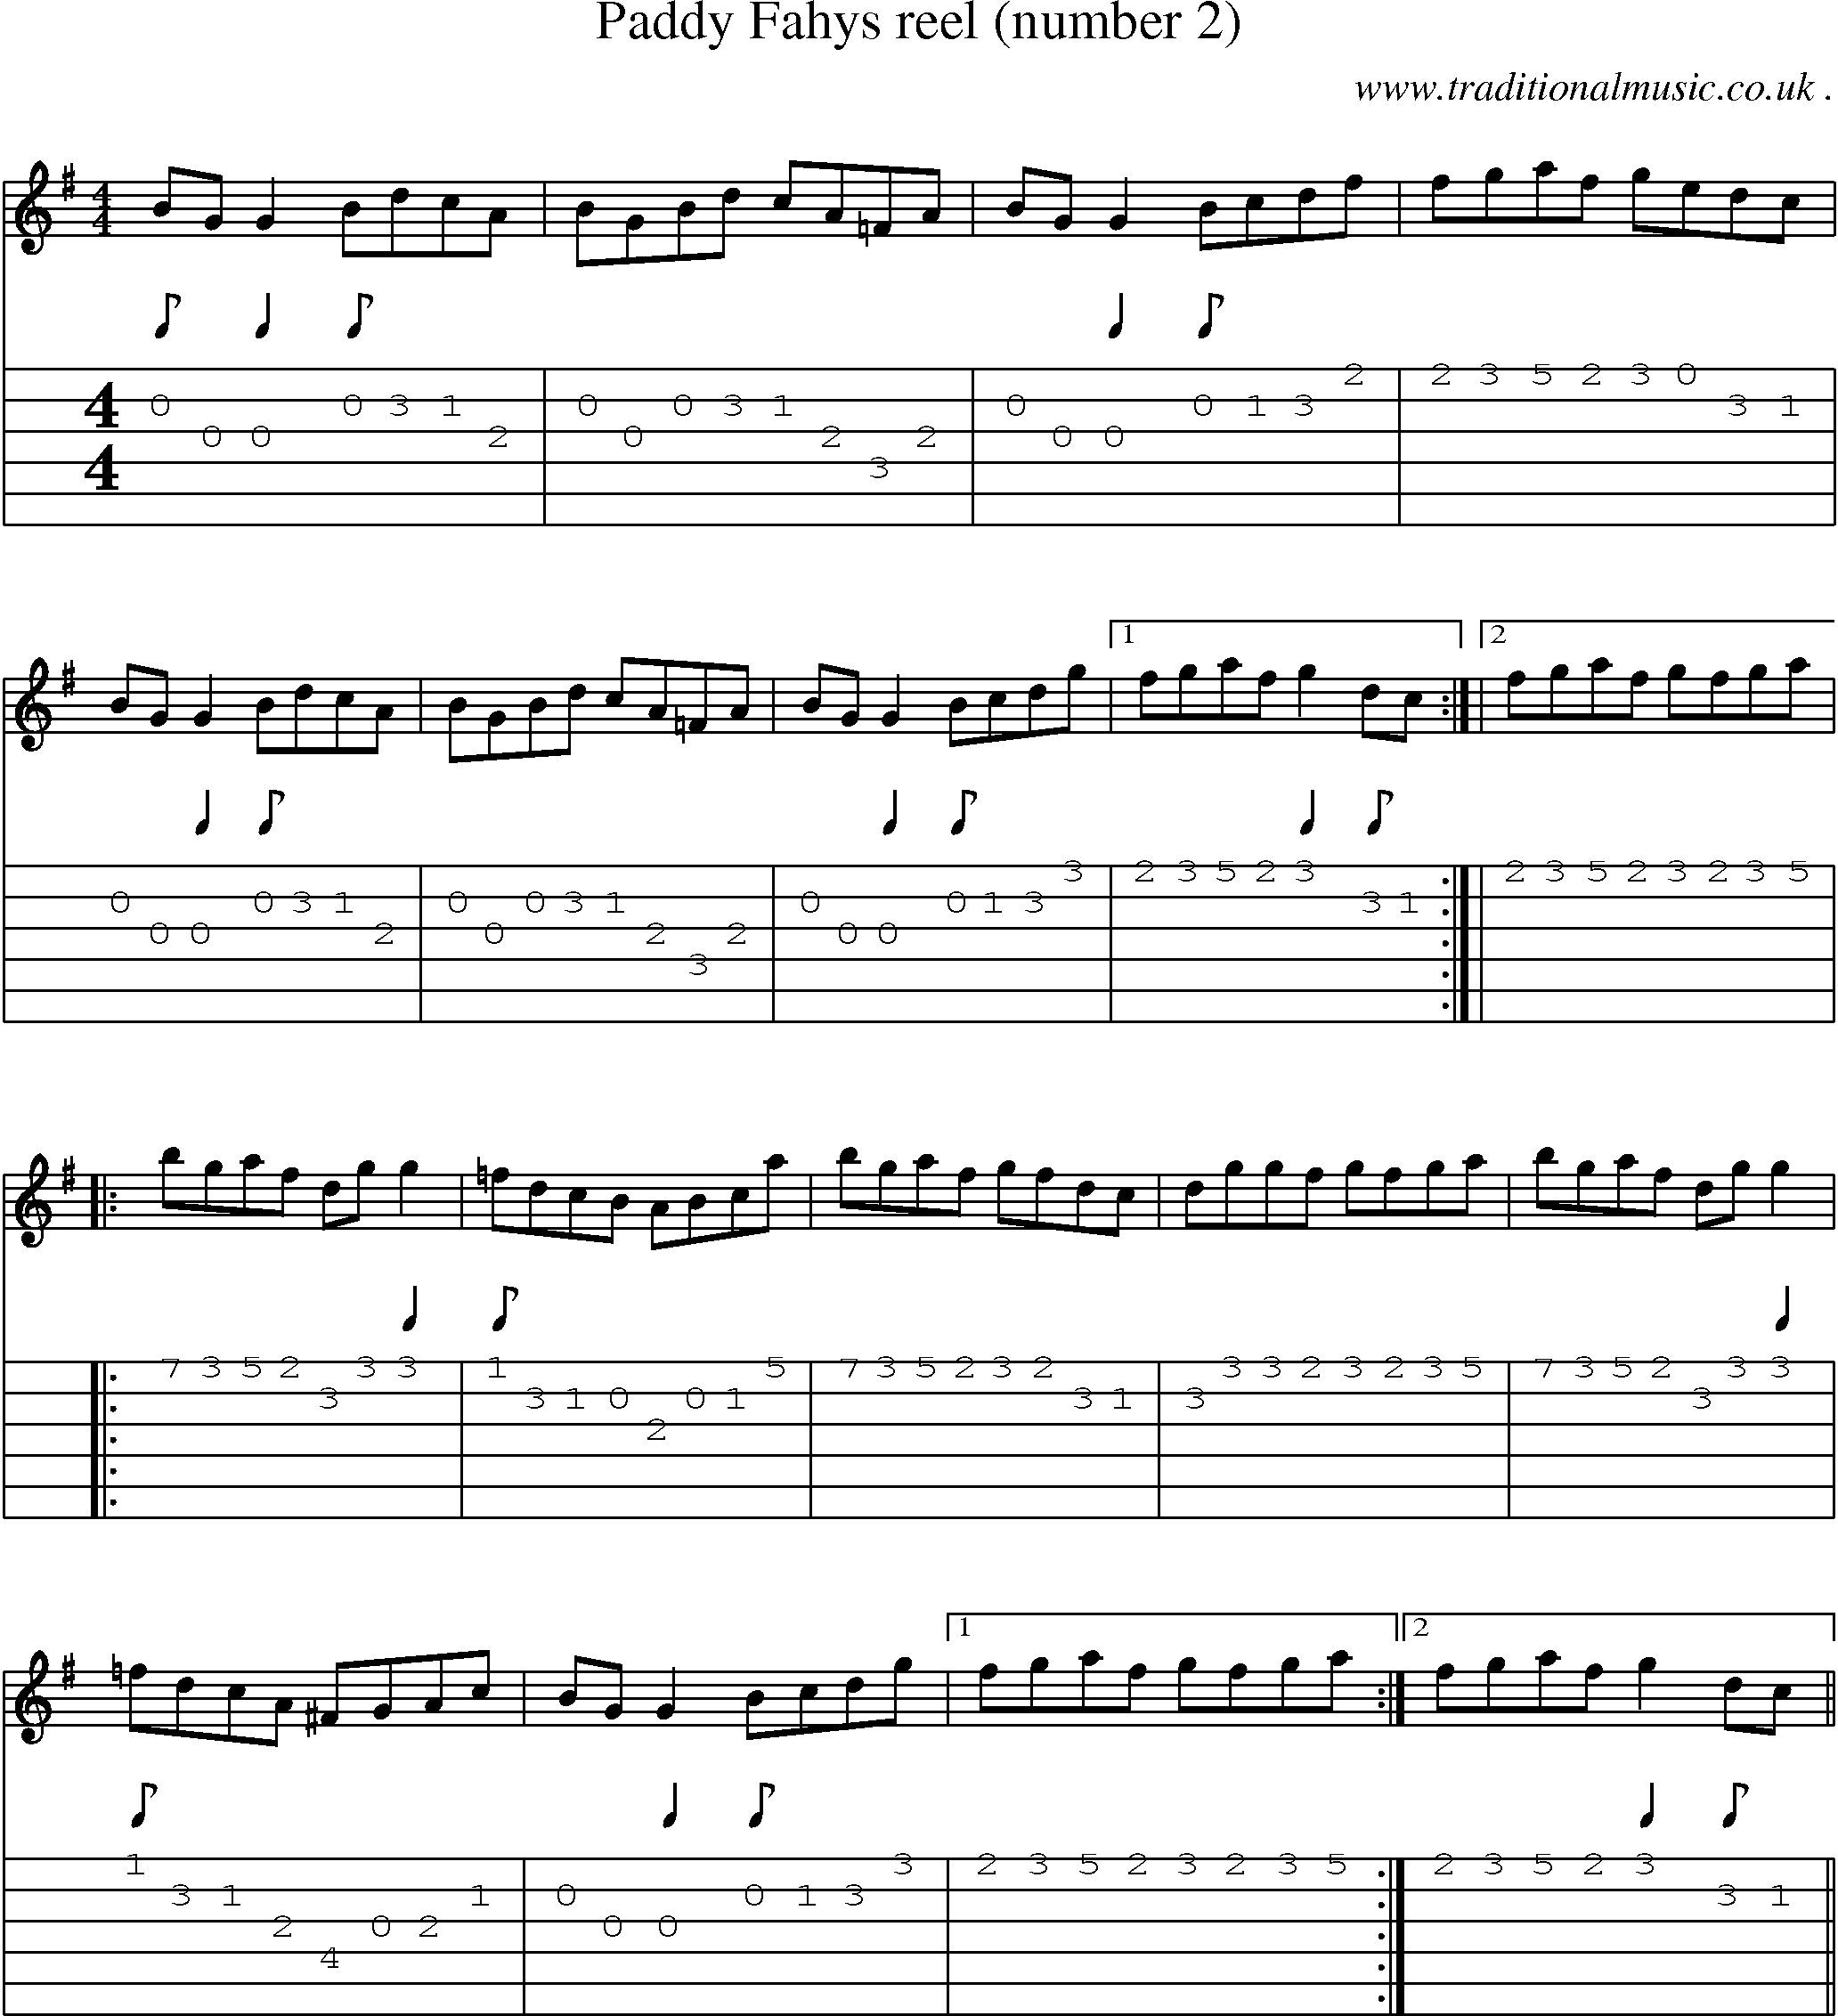 Sheet-Music and Guitar Tabs for Paddy Fahys Reel (number 2)